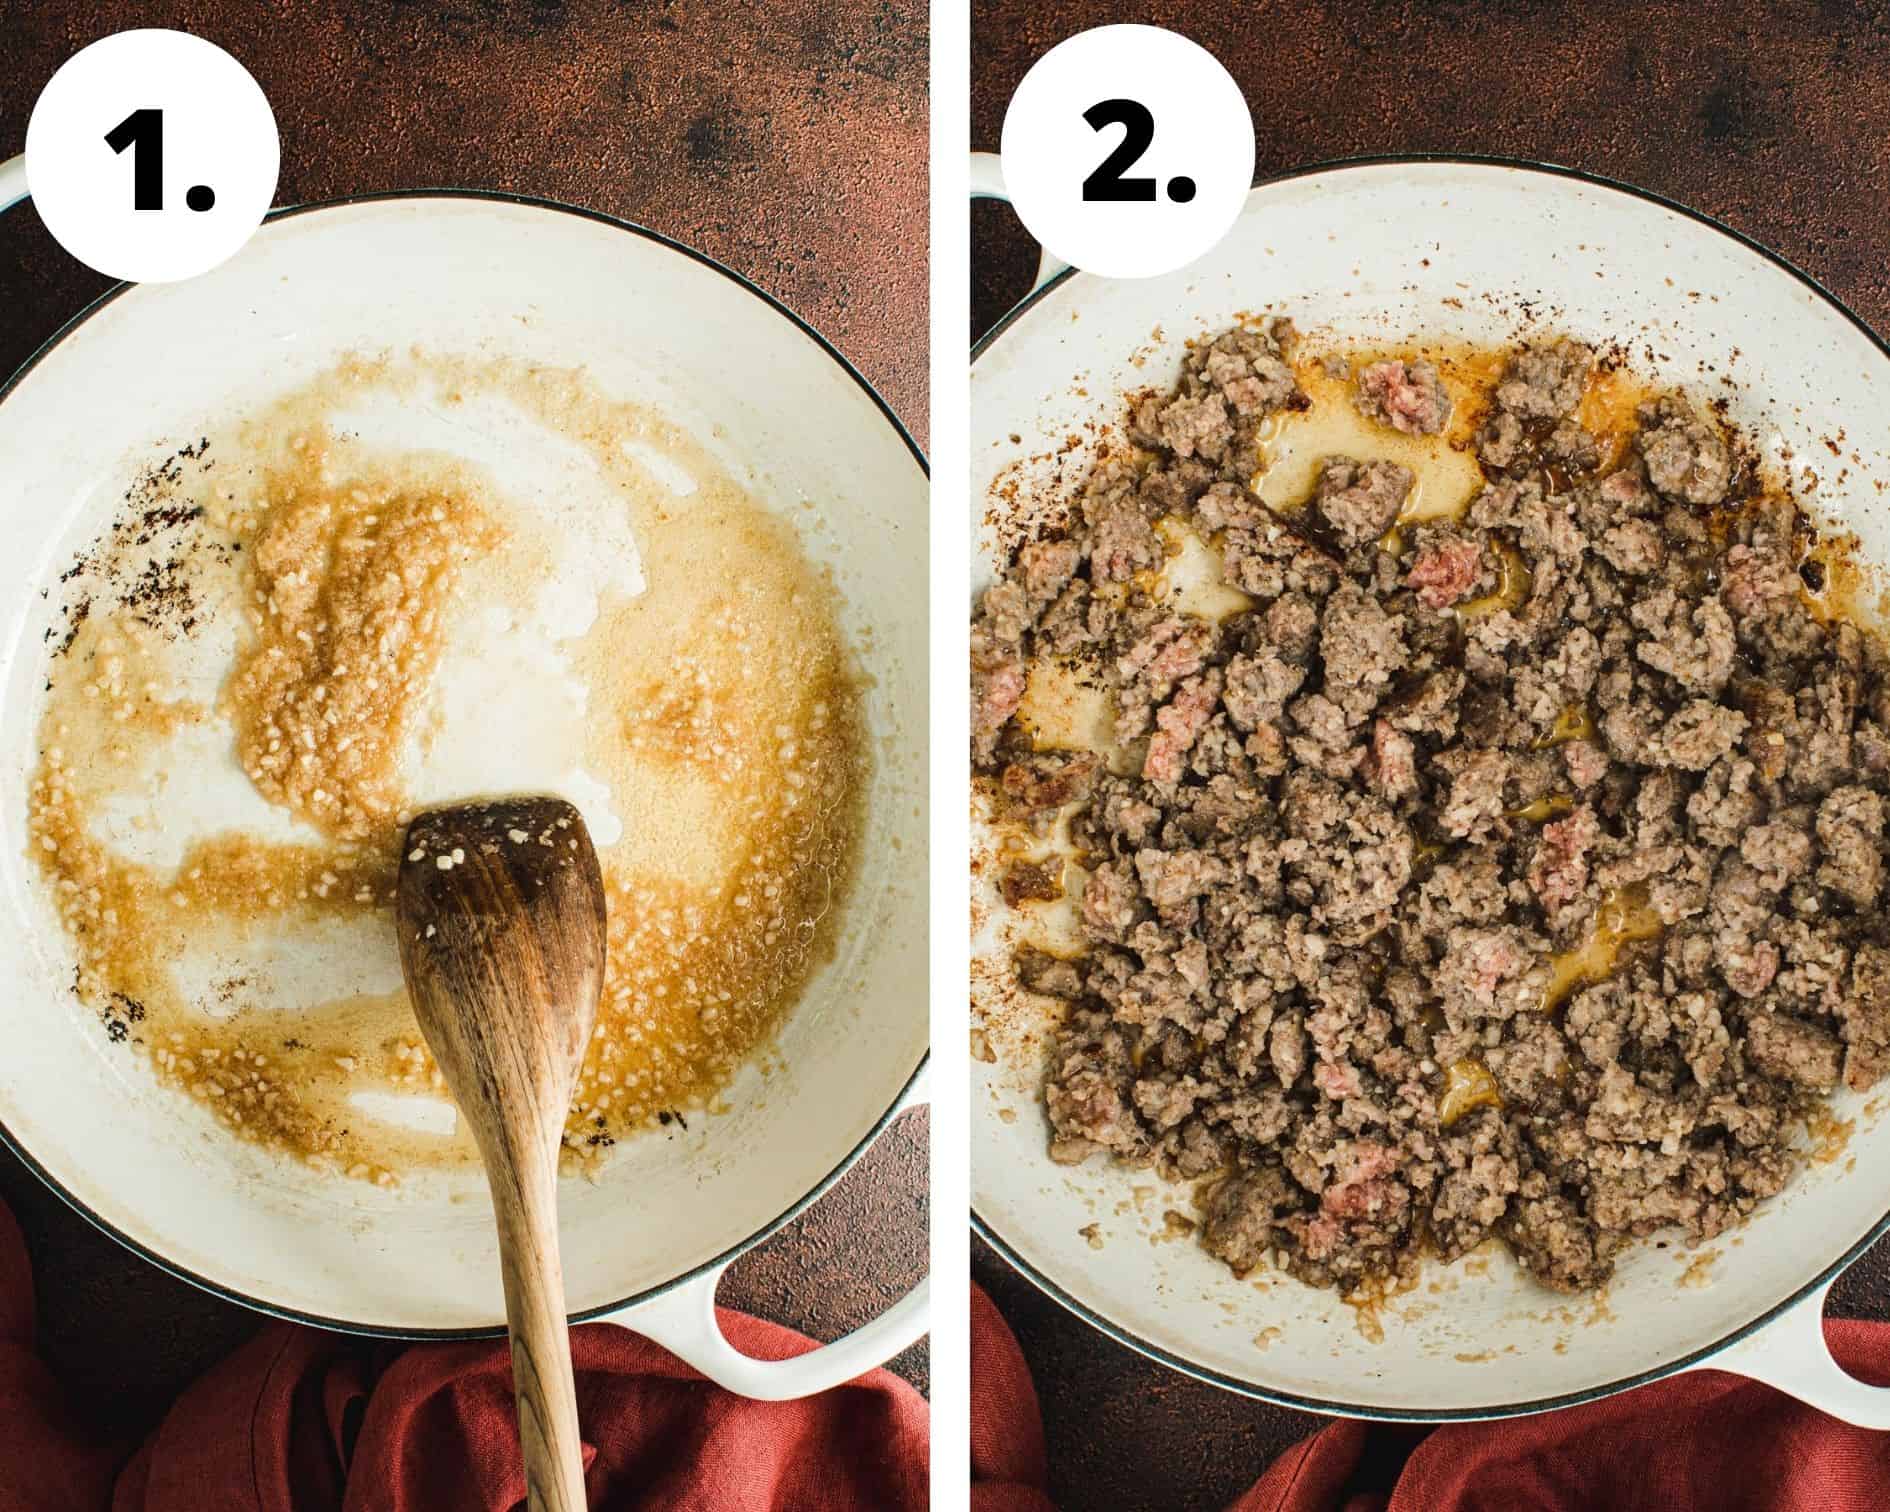 Egg roll in a bowl process steps 1 and 2.